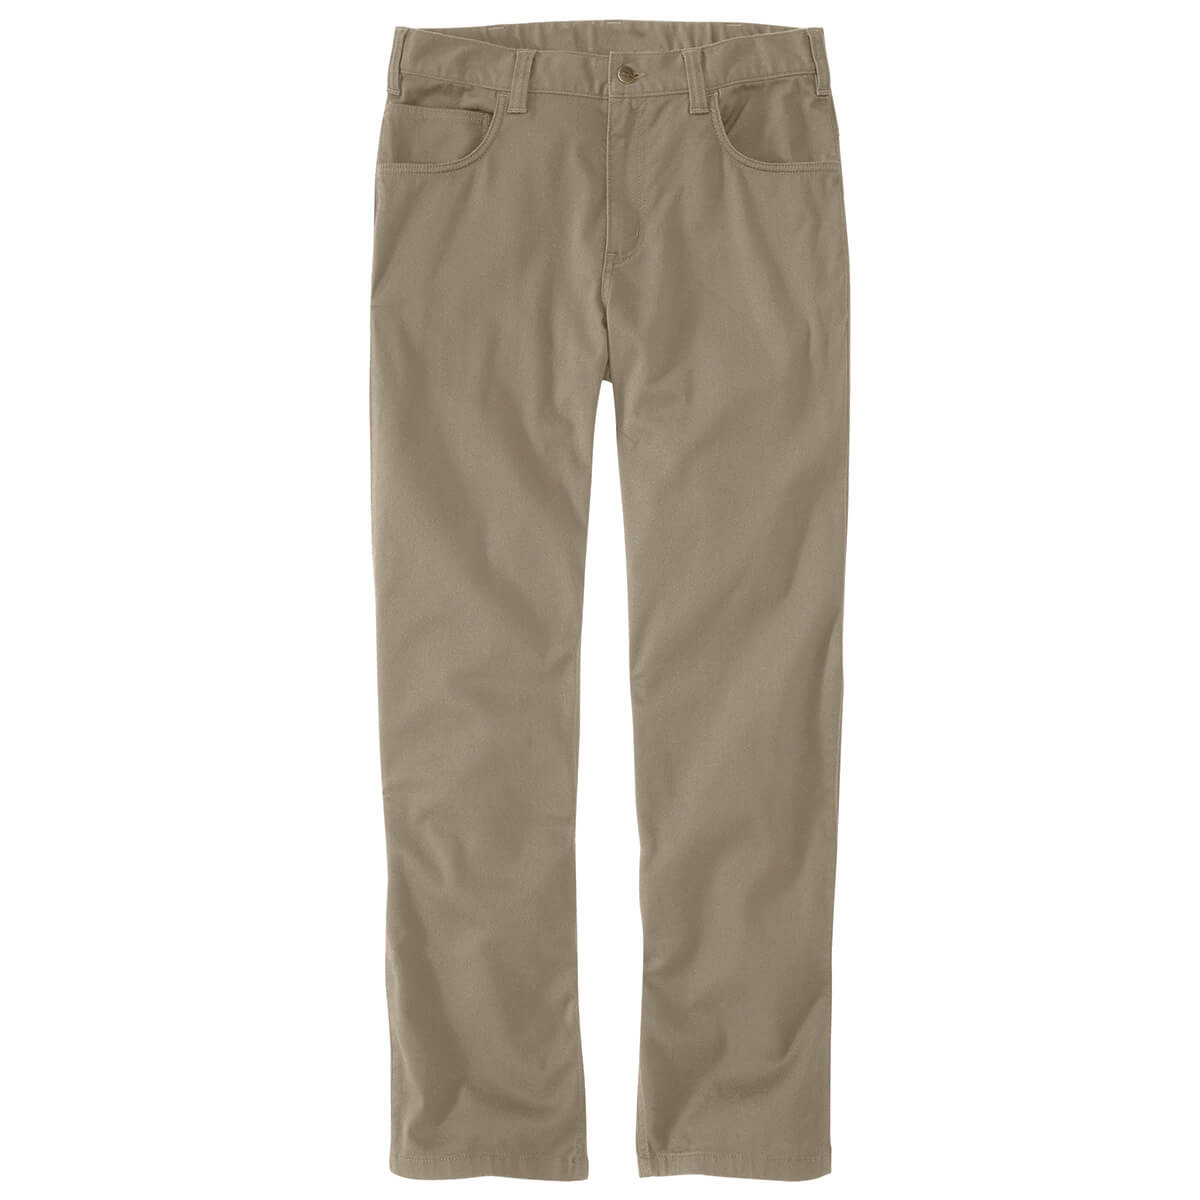 106279 - Carhartt Men's Force® Relaxed Fit Pant